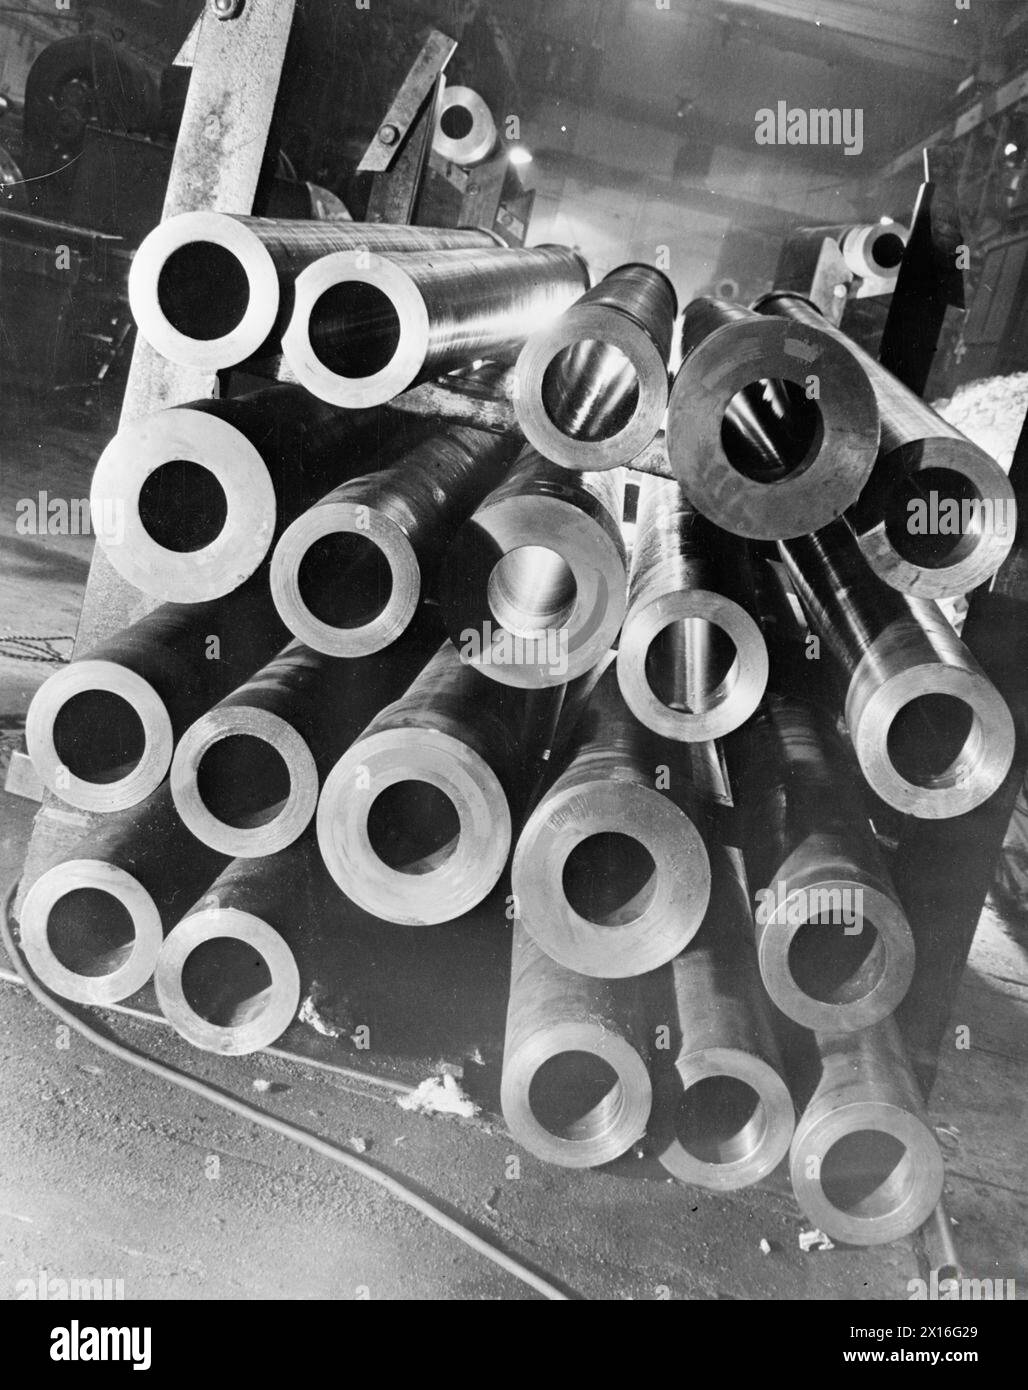 BIRTH OF A GUN: THE PRODUCTION OF A 25 POUNDER FIELD GUN, 1942 - A pile of 25 pounder field gun barrels await rifling and further work at this factory, somewhere in Britain Stock Photo